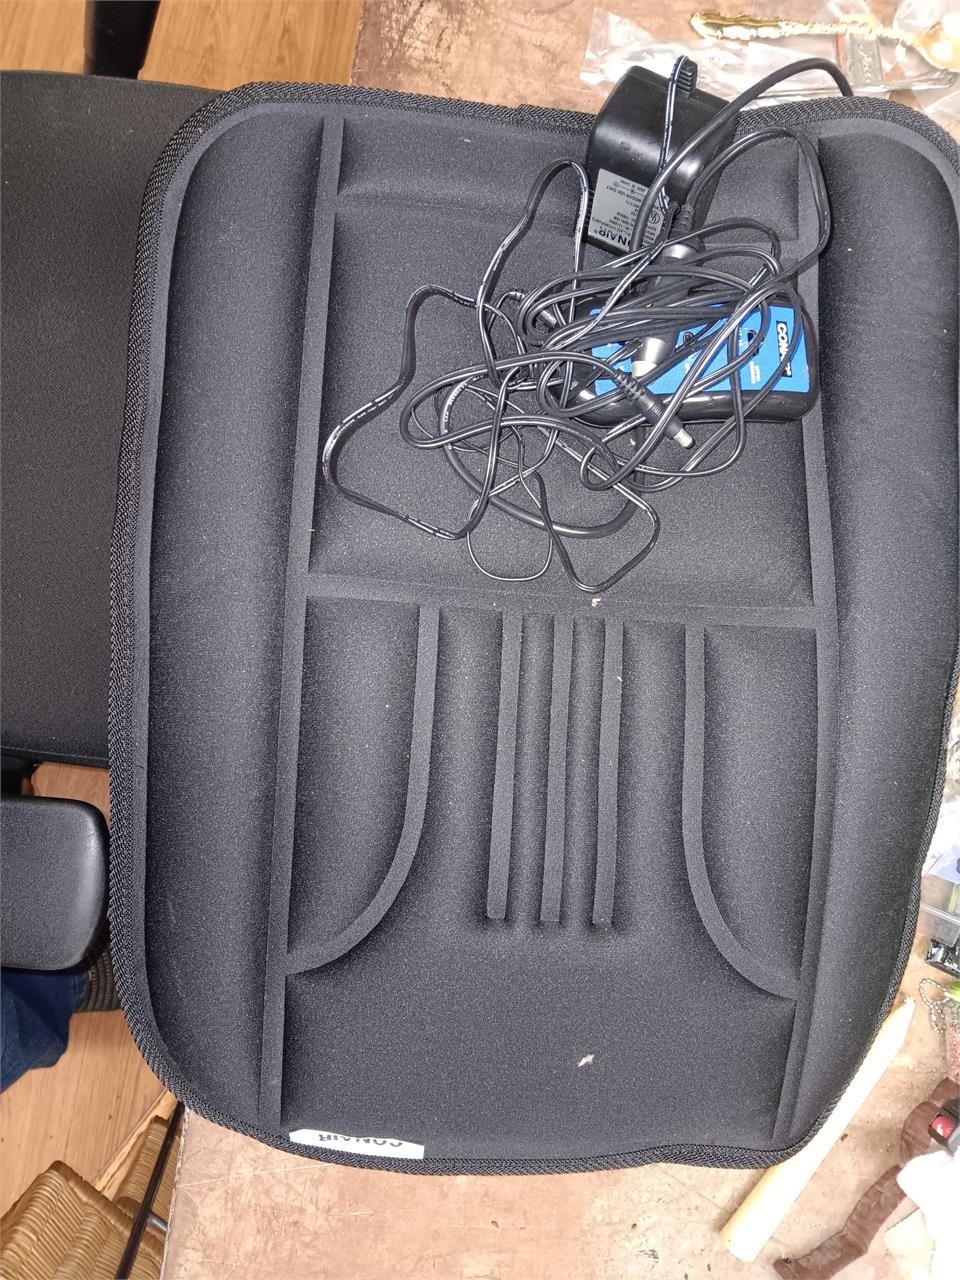 12v car seat with controller